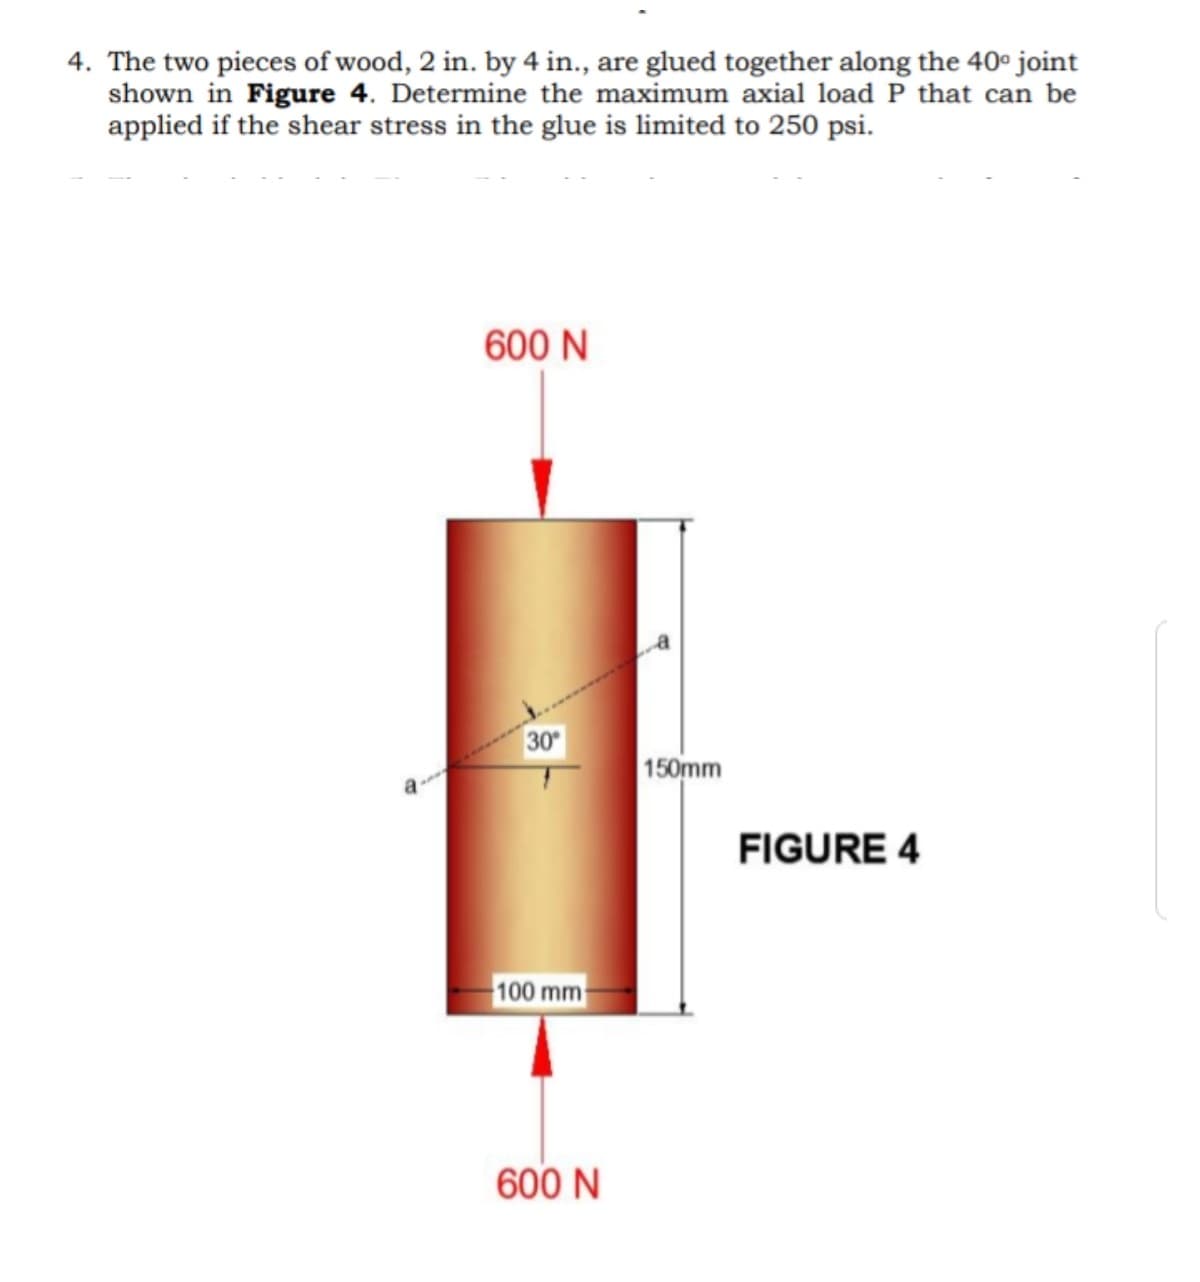 4. The two pieces of wood, 2 in. by 4 in., are glued together along the 40° joint
shown in Figure 4. Determine the maximum axial load P that can be
applied if the shear stress in the glue is limited to 250 psi.
600 N
30
150mm
FIGURE 4
100 mm
600 N
